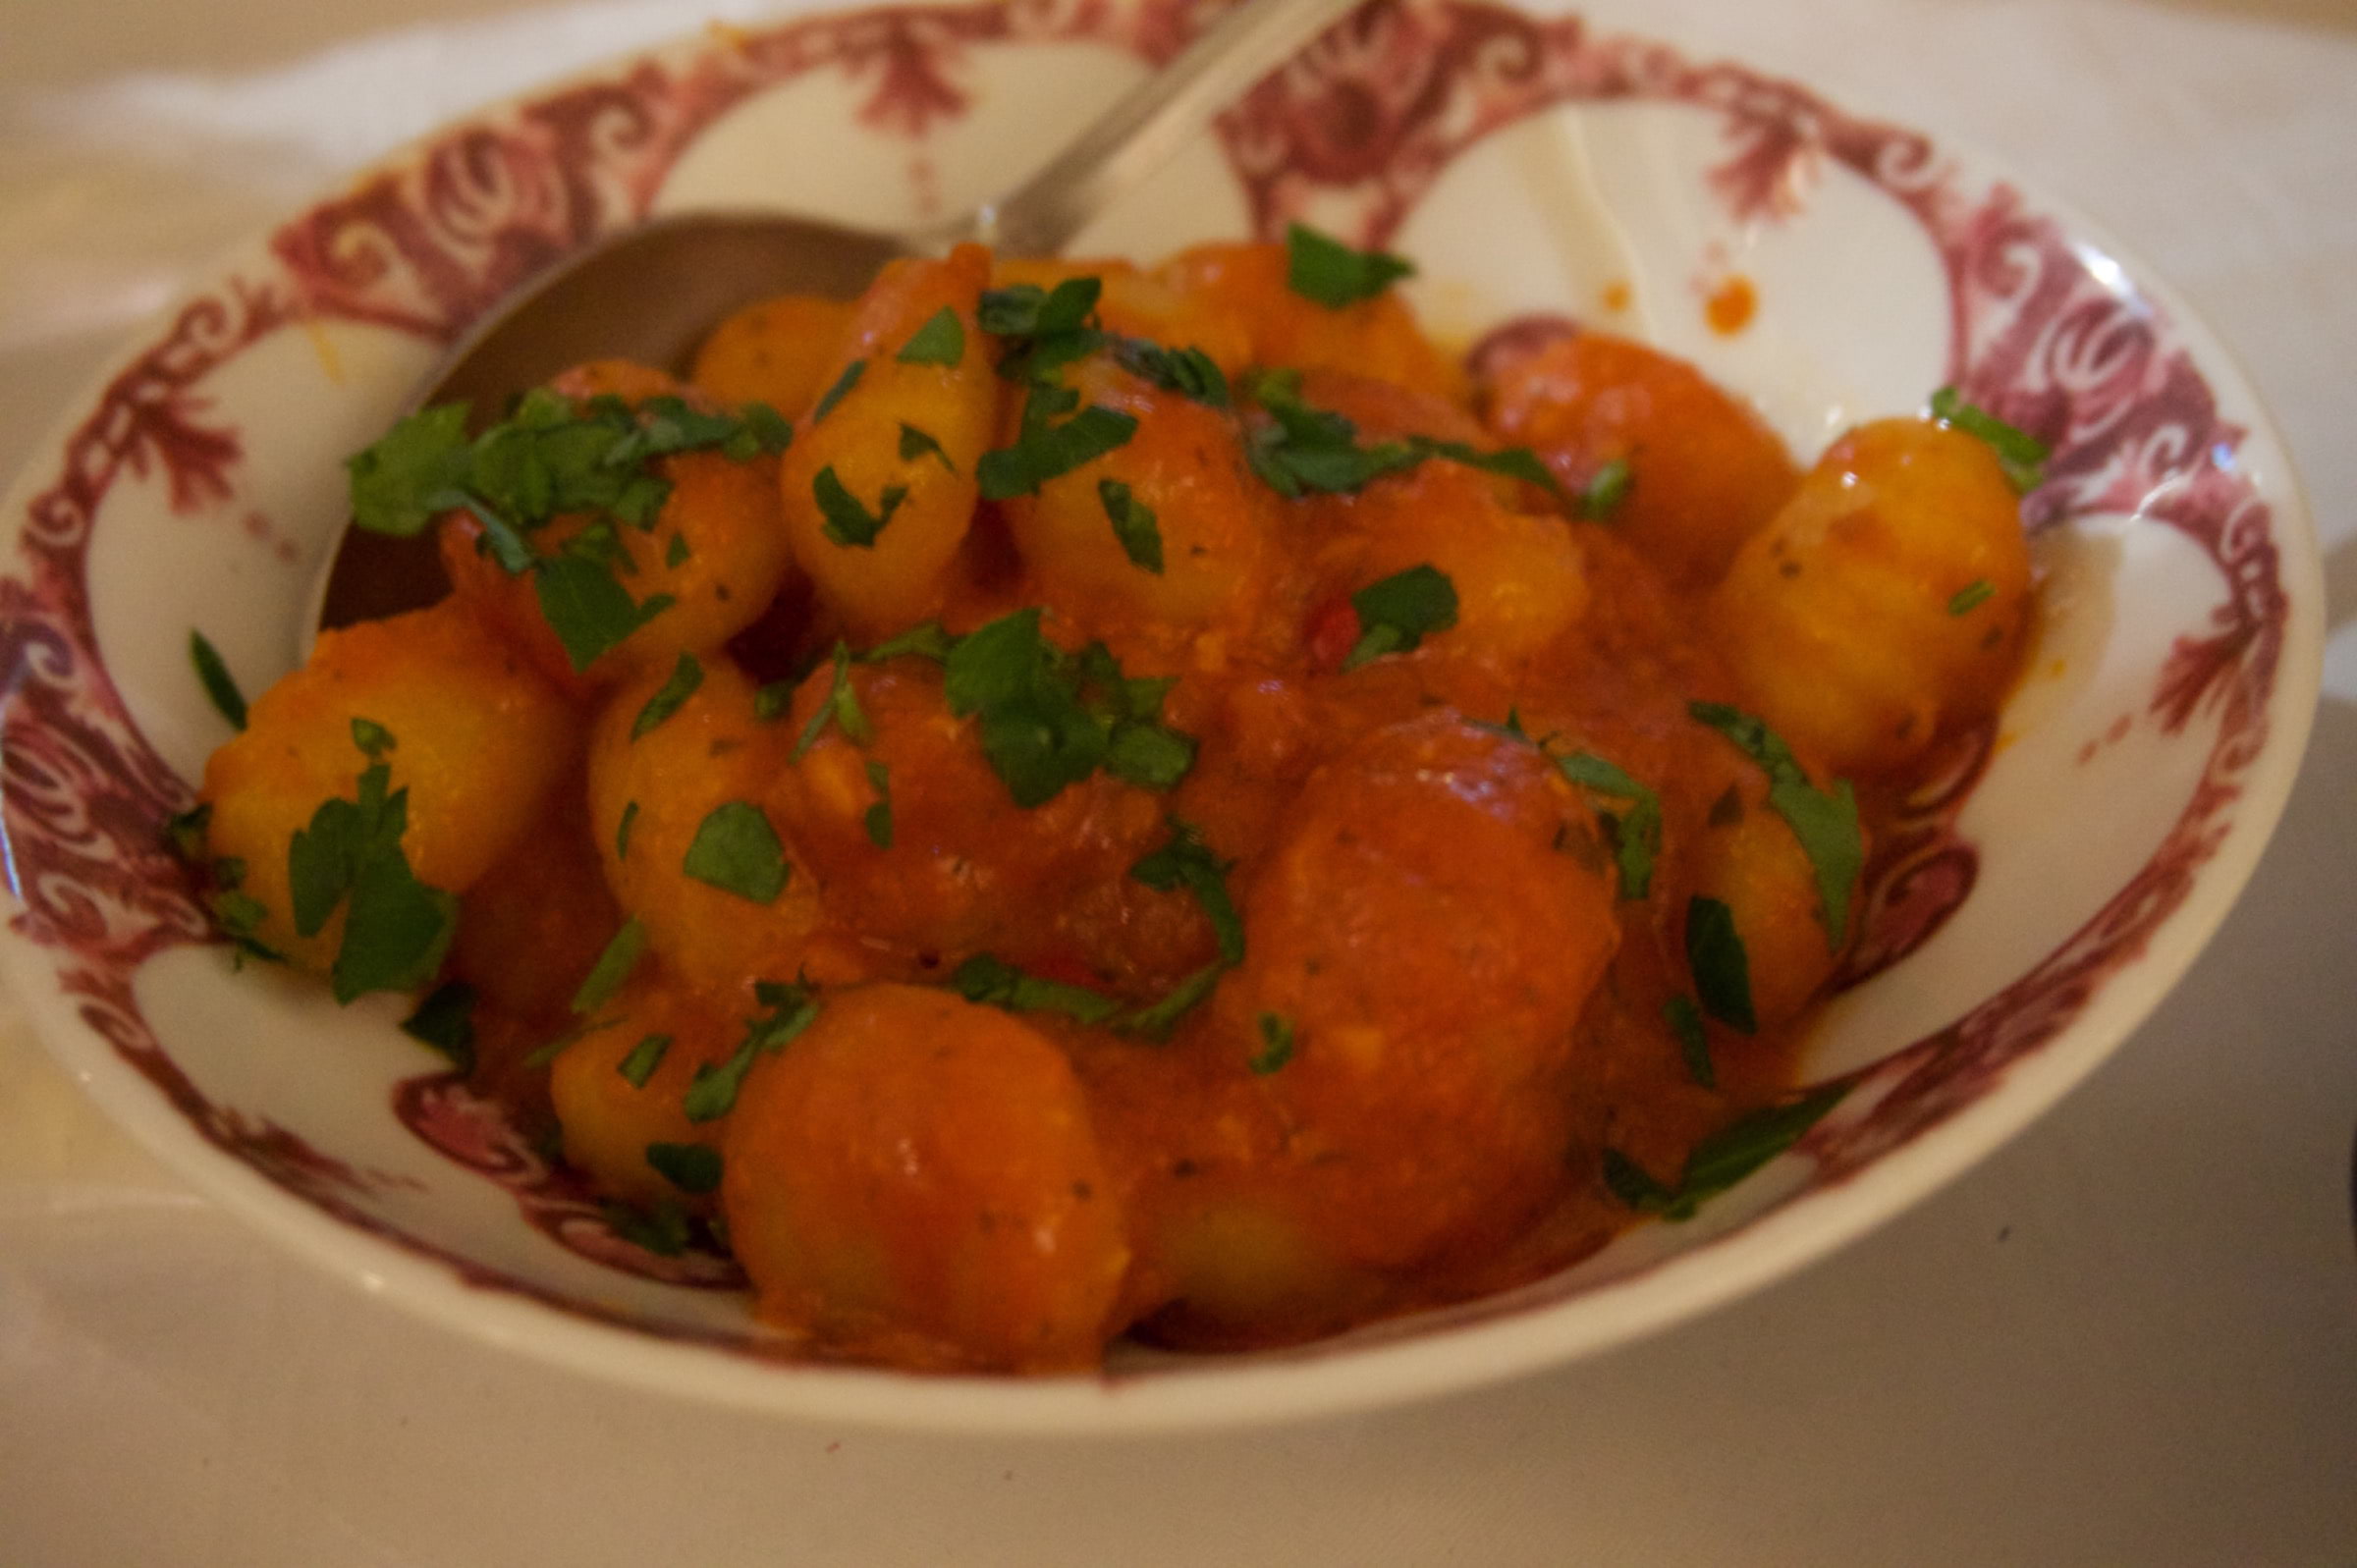 Gnocchi med salsa – Photo from Ciccio's by Lisa S. (28/05/2020)